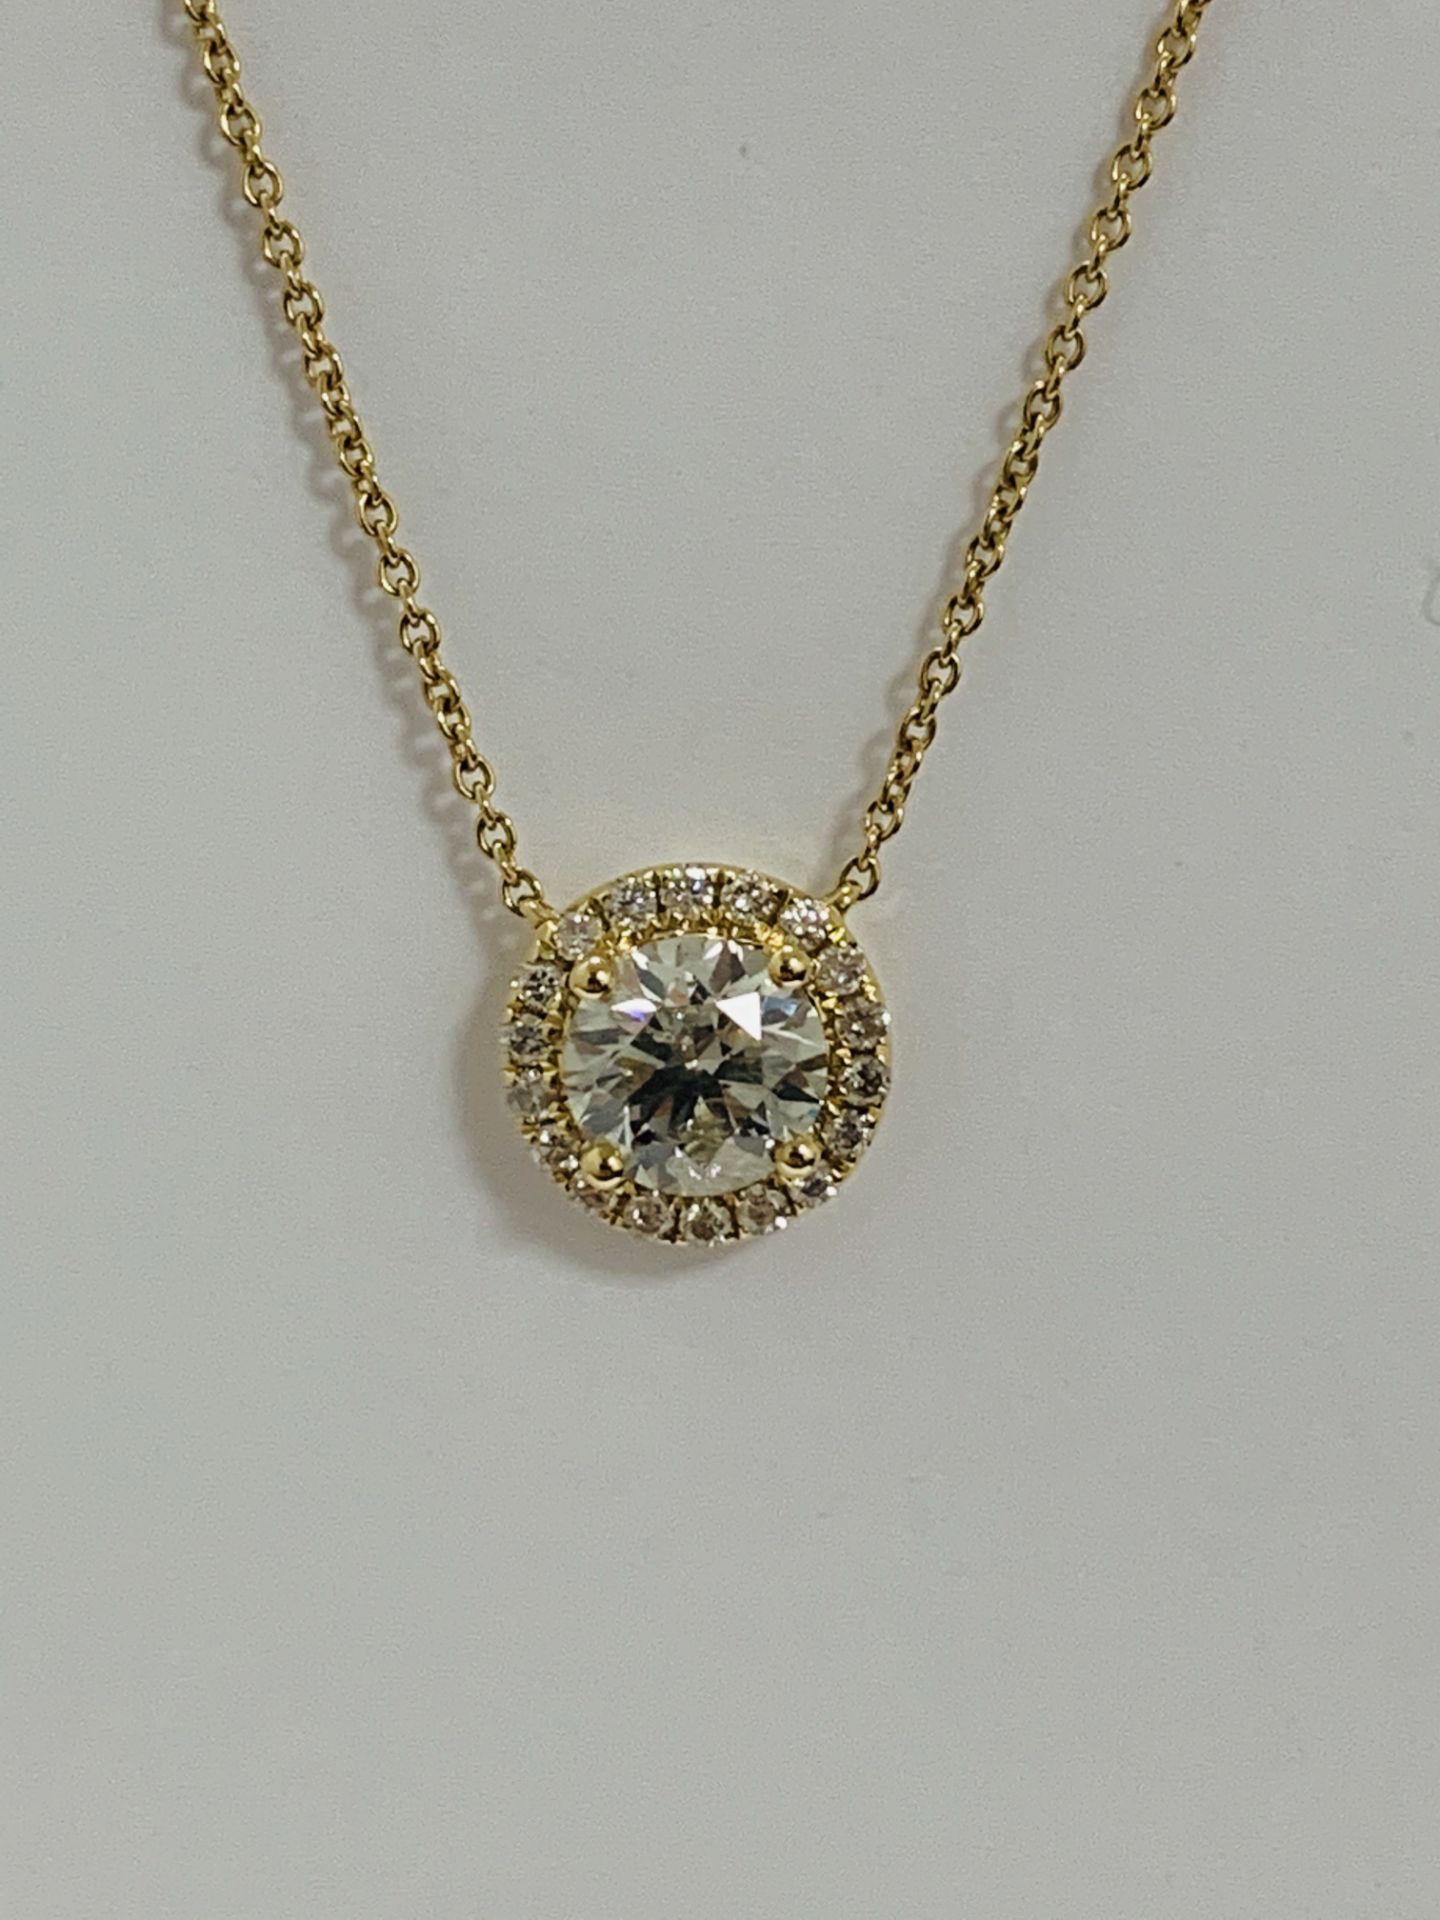 18ct Yellow Gold Diamond Necklace - Image 2 of 9